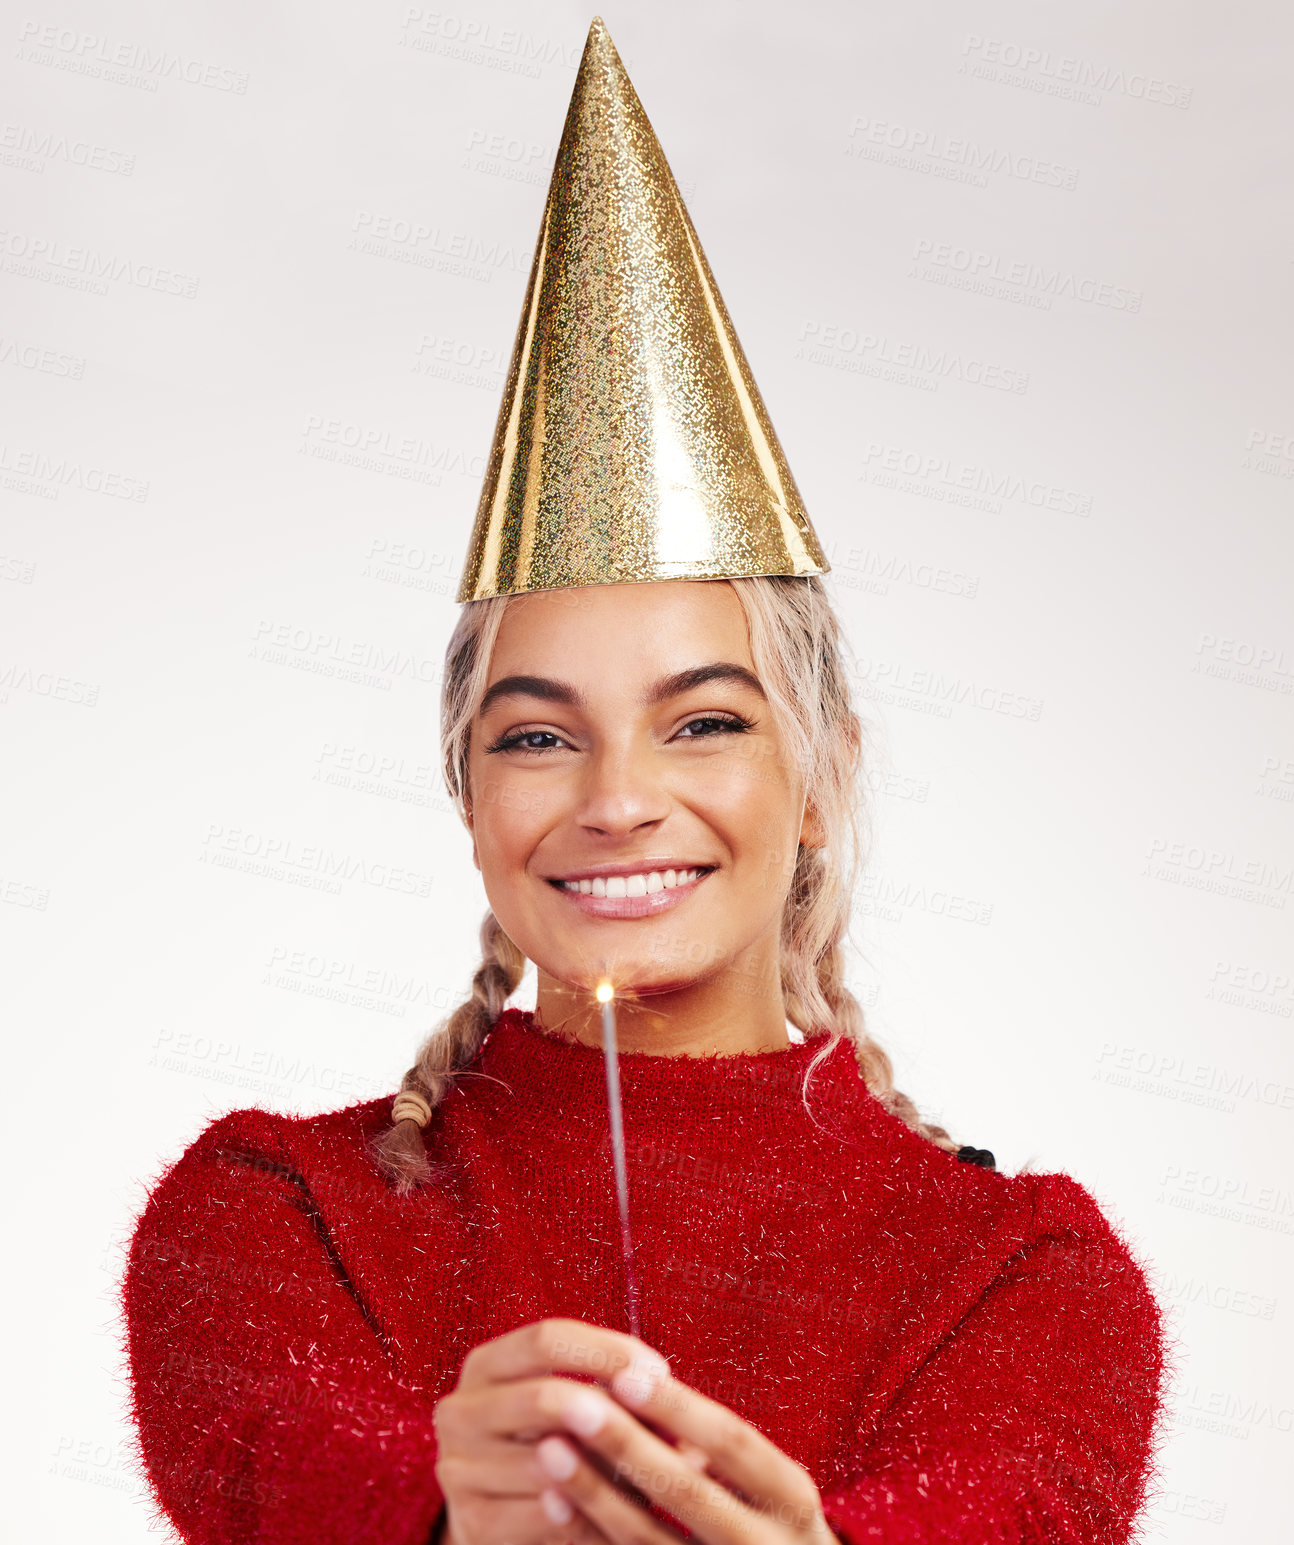 Buy stock photo Studio shot of a young woman wearing a party hat while holding a sparkler against a grey background